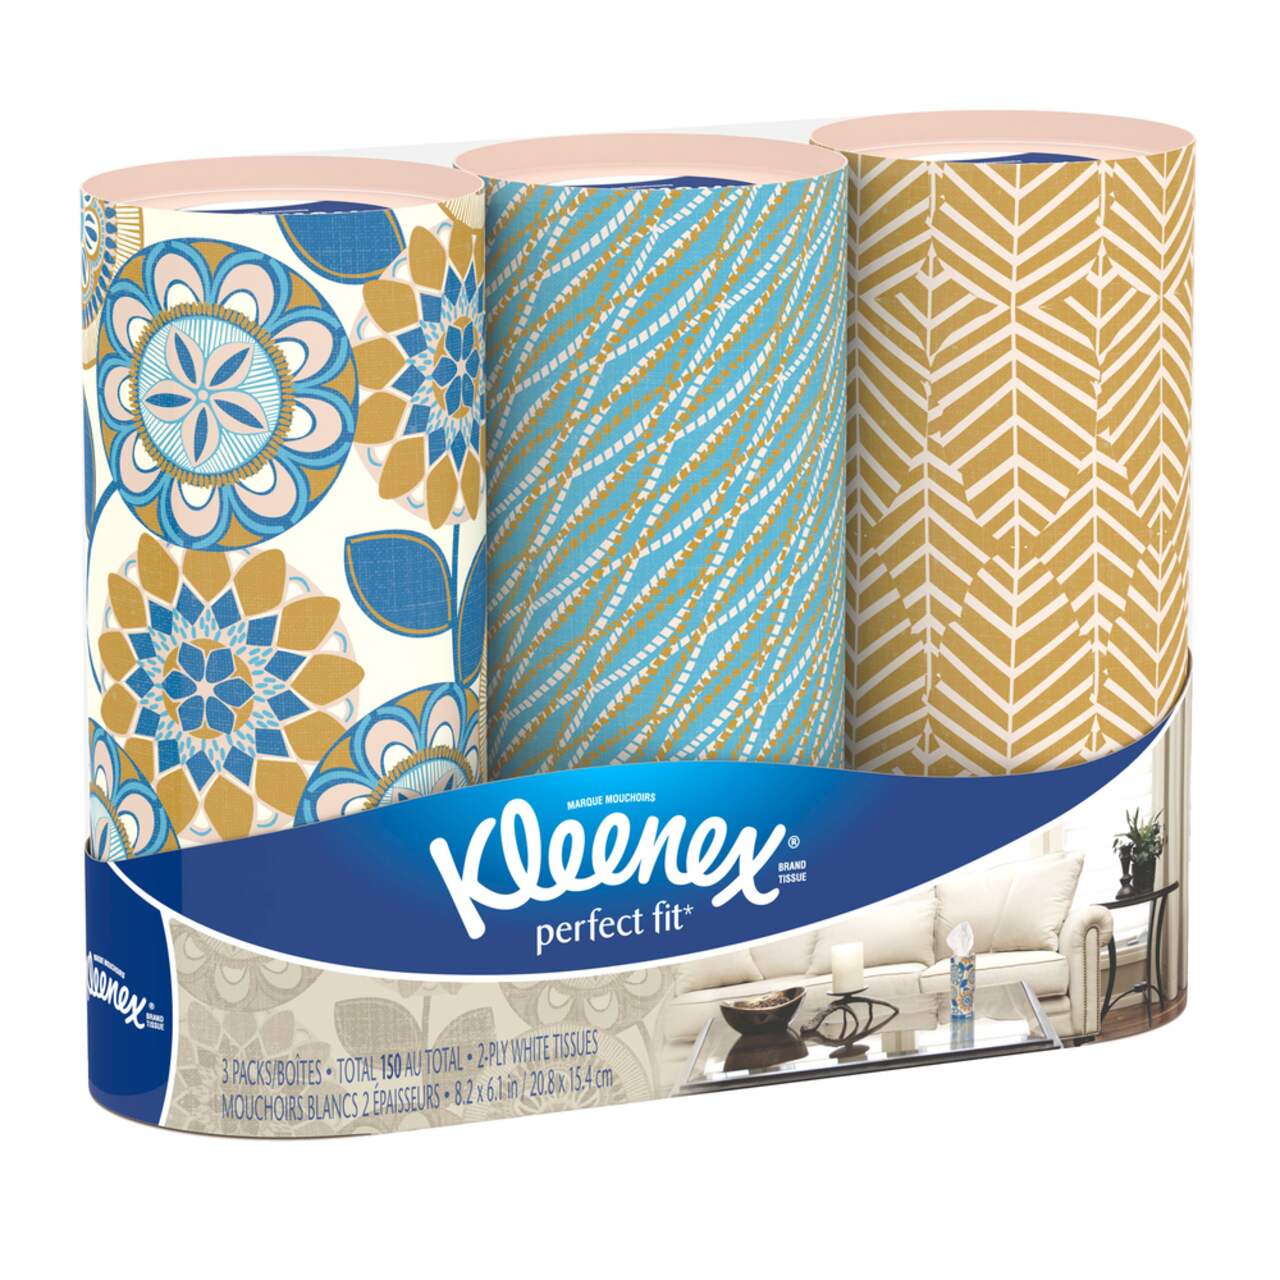 Reeflex Car Tissues (4 Canisters/200 Tissues) - Disposable Facial Tissues  Boxed in Canisters with Perfect Cup Holder Fit | Quality Car Travel Tissues